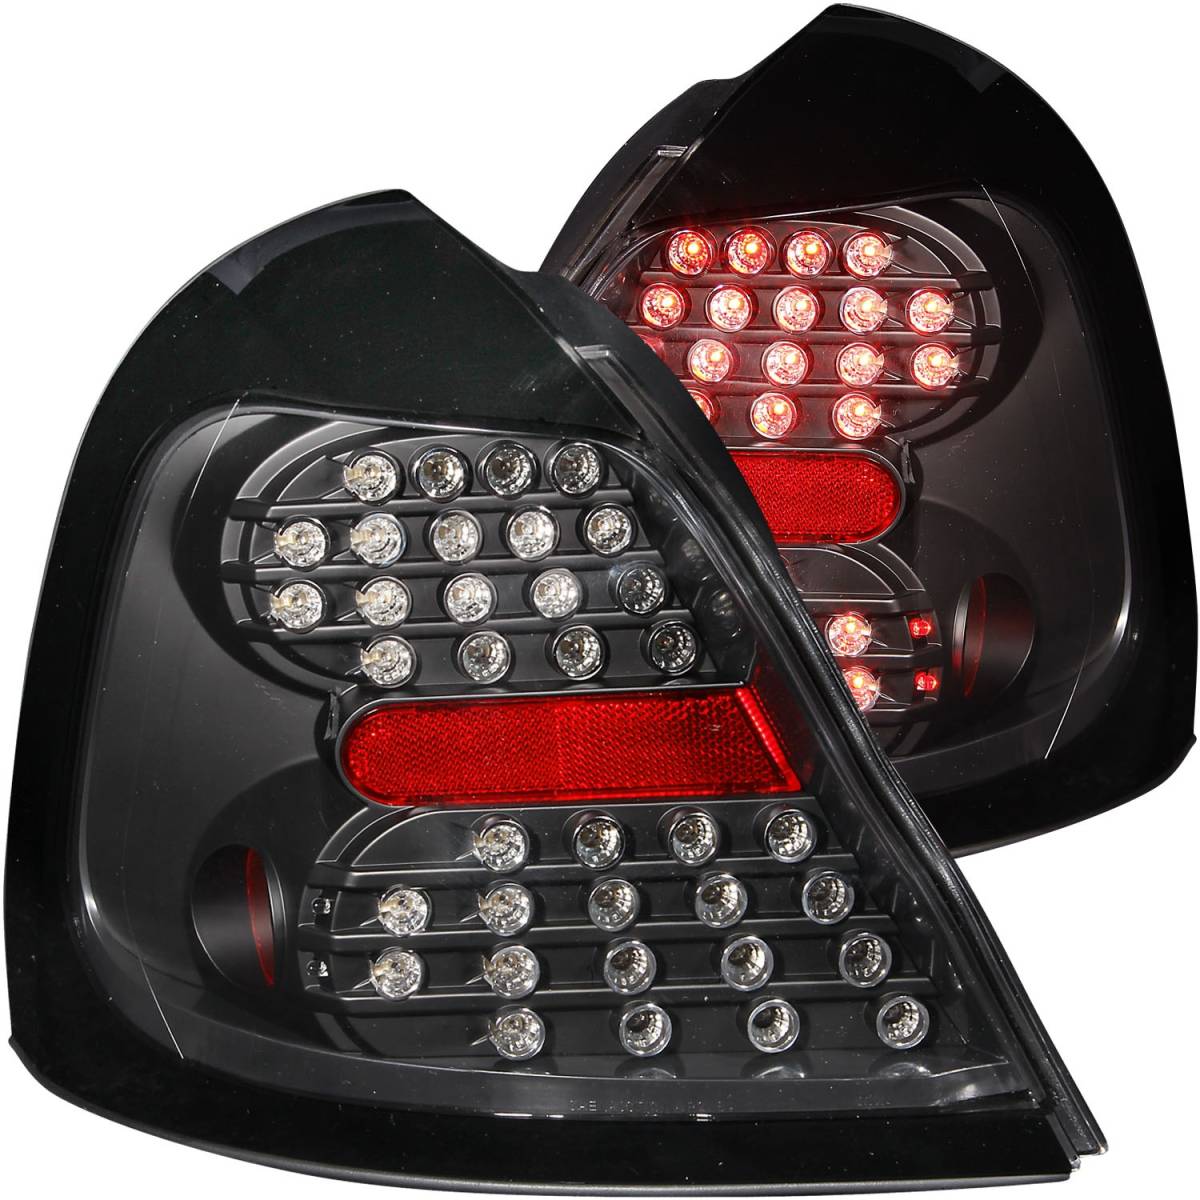 Golight Car and Truck Lights and Indicators for sale